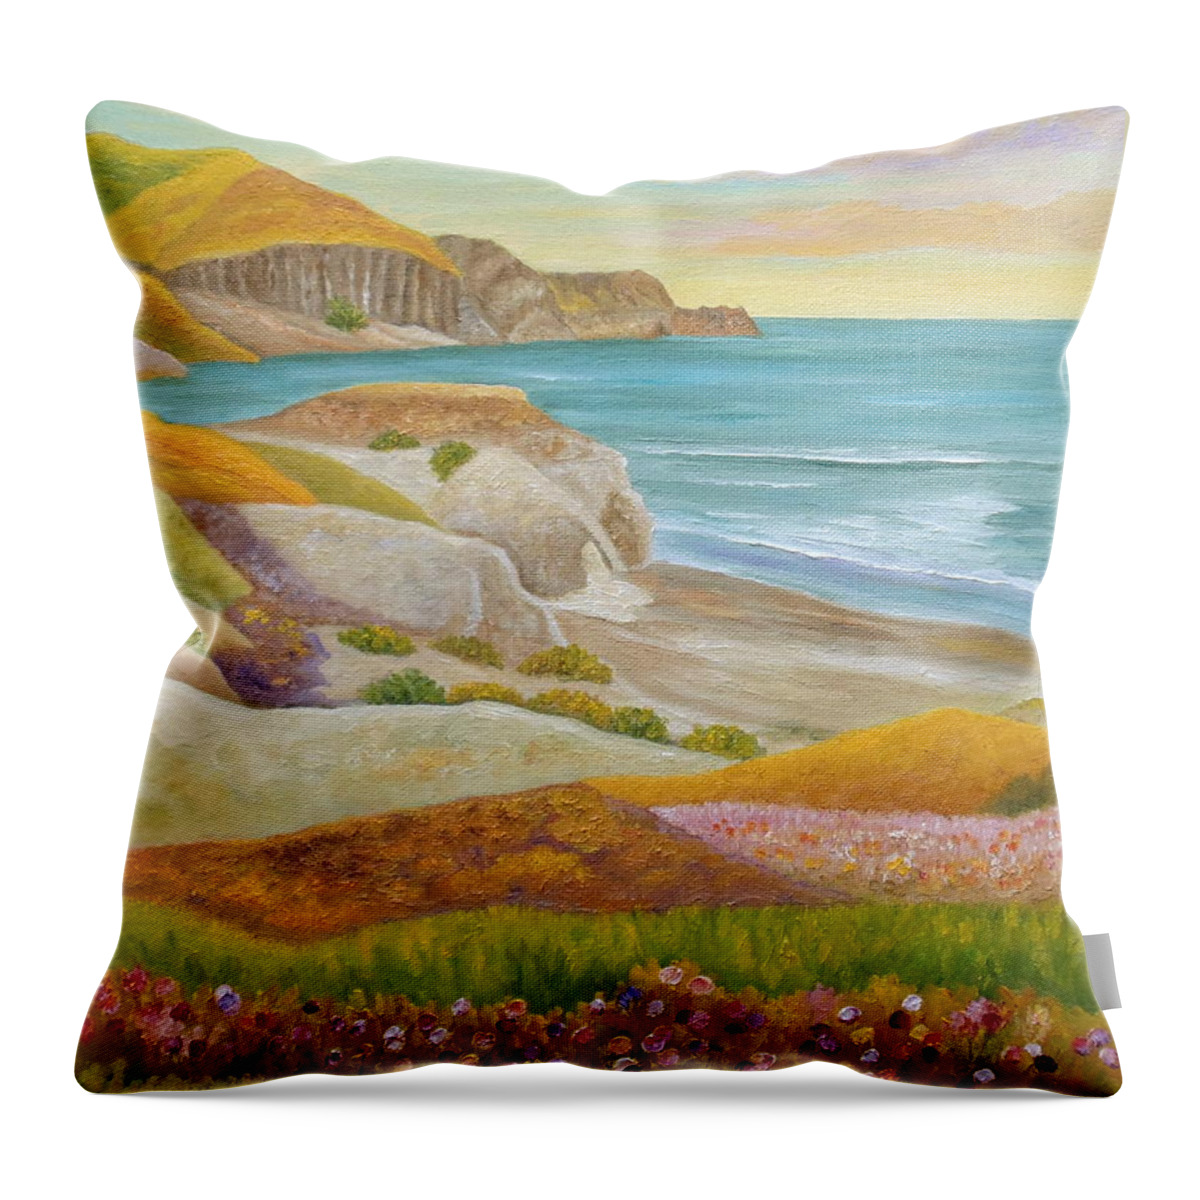 Wild Flowers Throw Pillow featuring the painting Prairie By The Sea by Angeles M Pomata